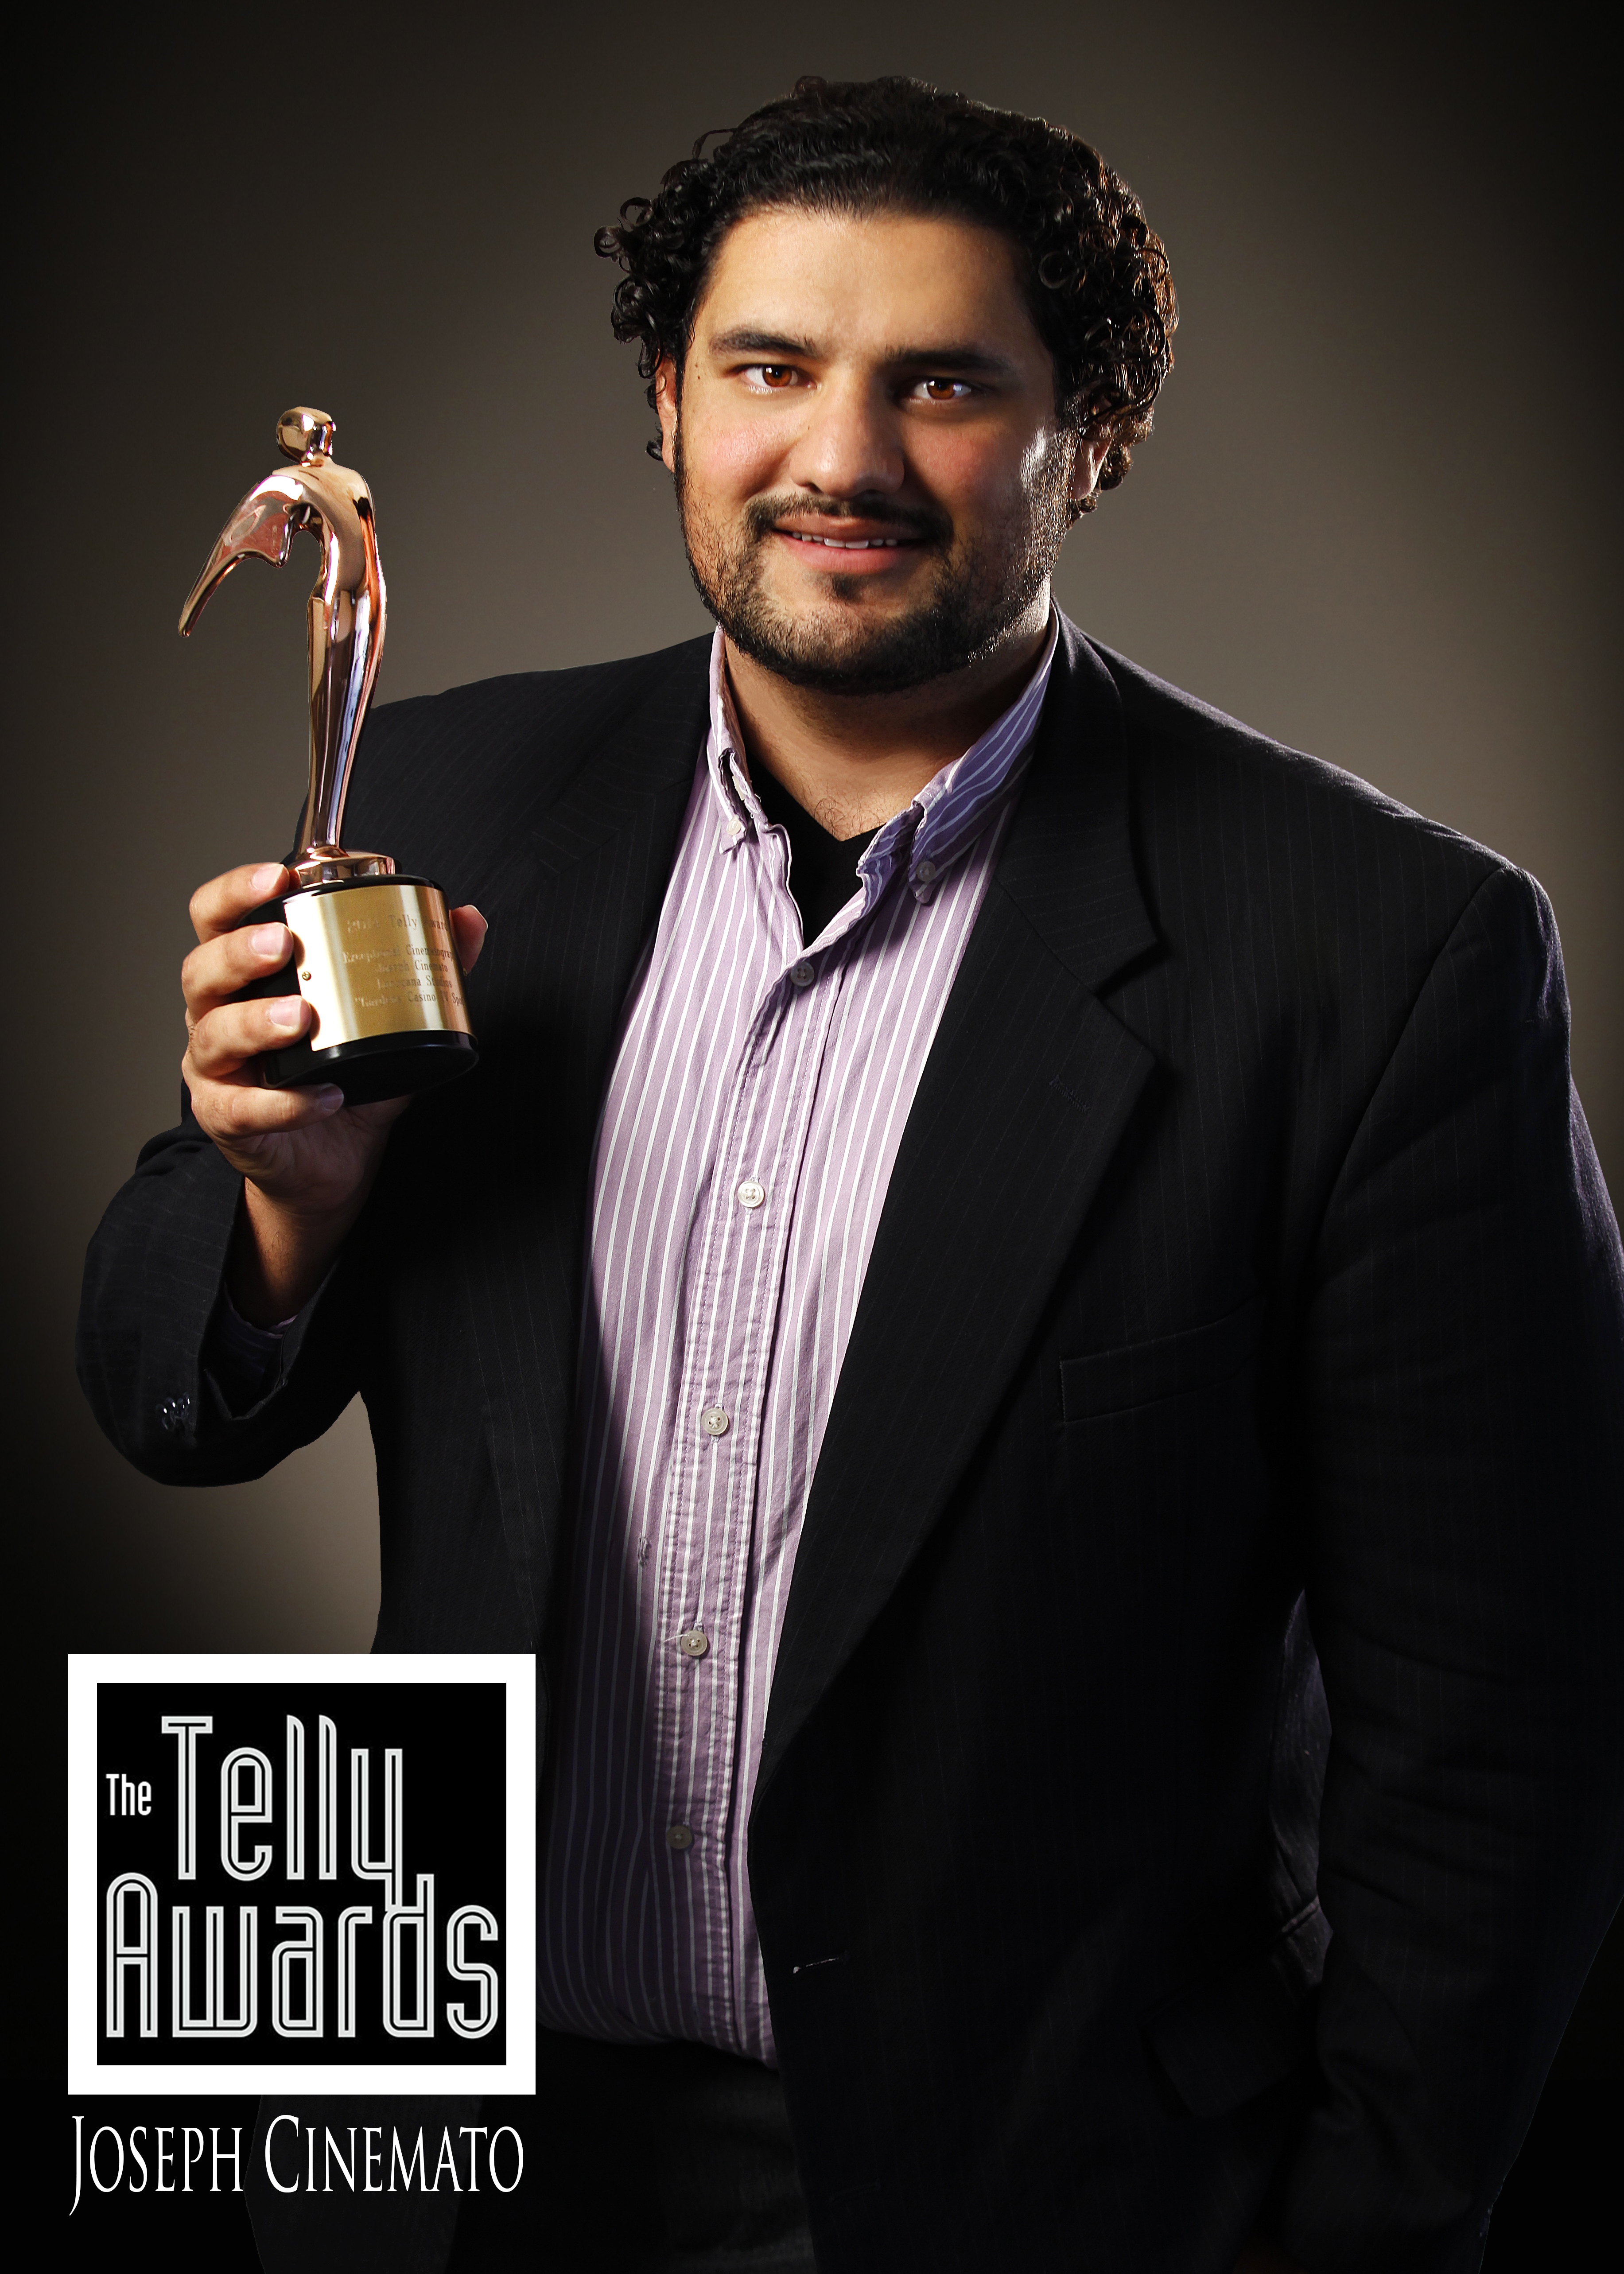 Joseph Cinemato awarded a 'TELLY AWARD' for an International TV Commercial Campaign.